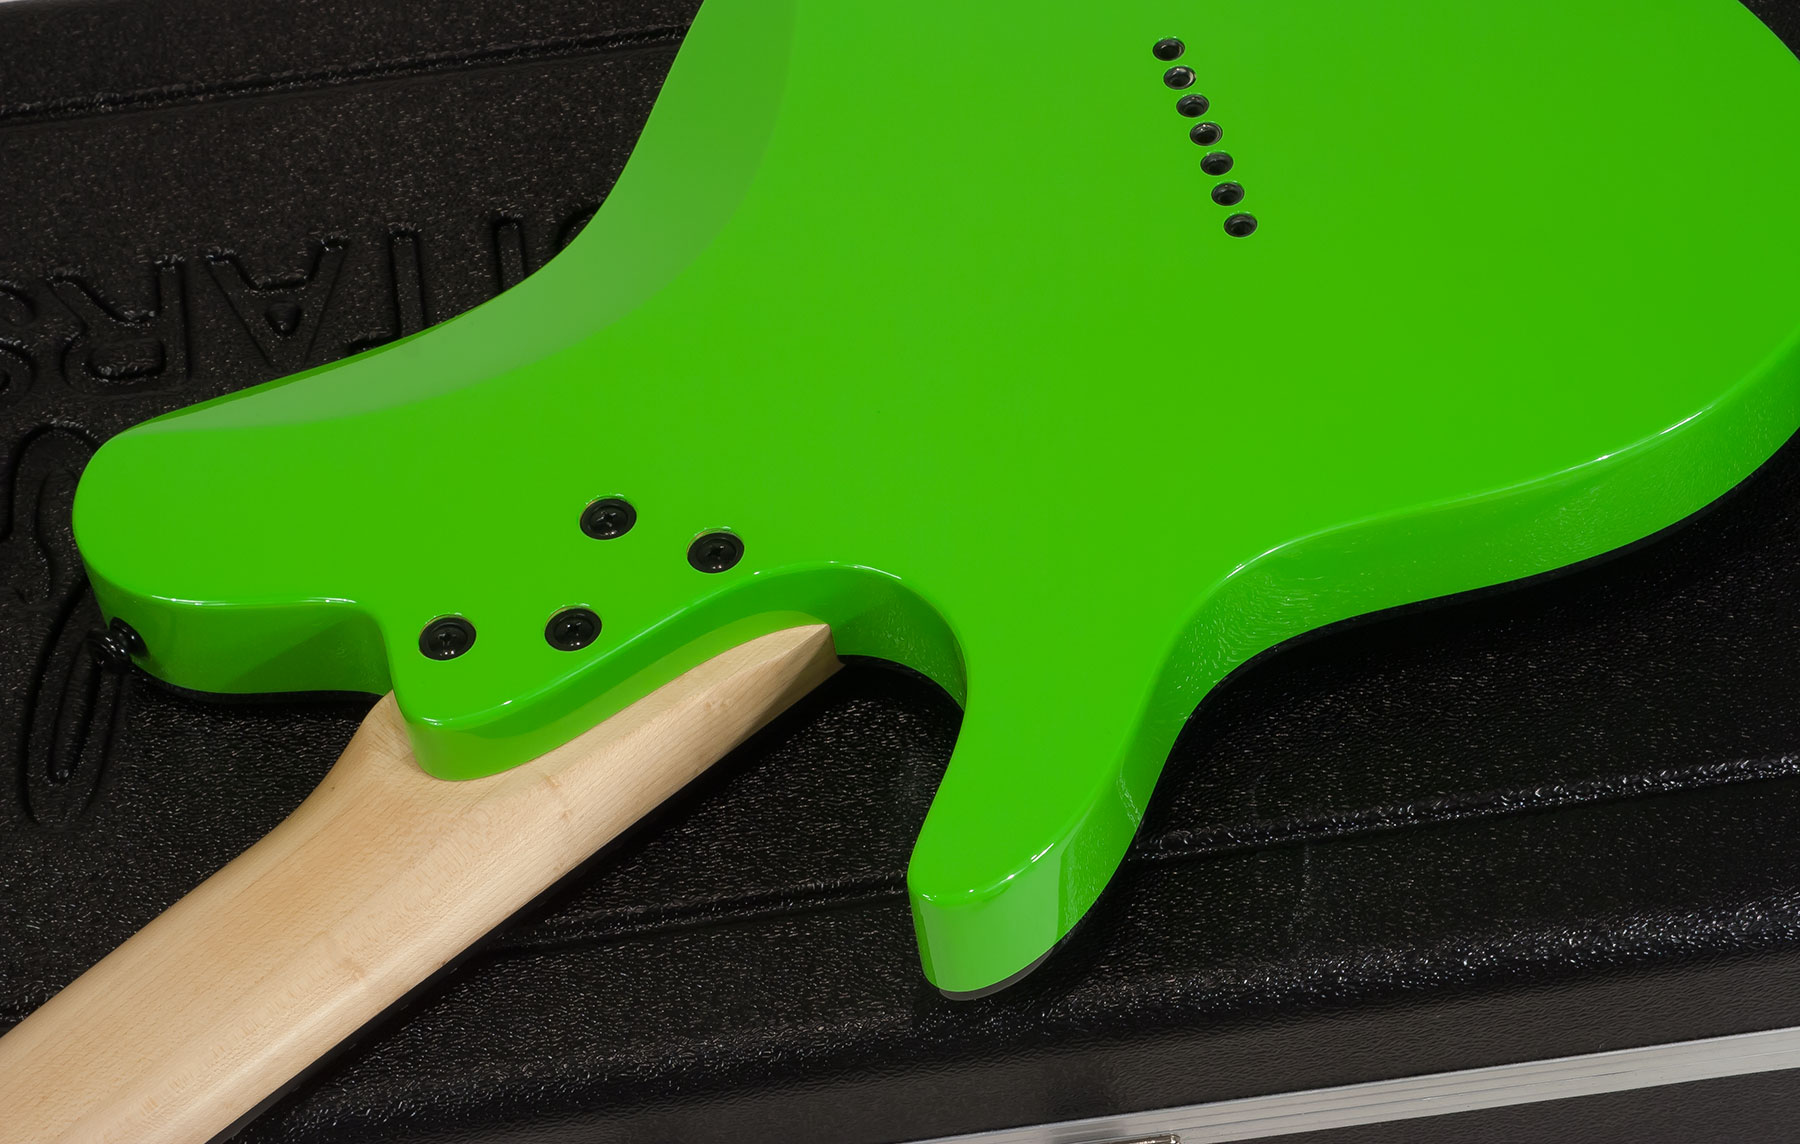 Ormsby Tx Gtr 7 Hs Ht Eb - Chernobyl Green - Guitare Électrique Multi-scale - Variation 3